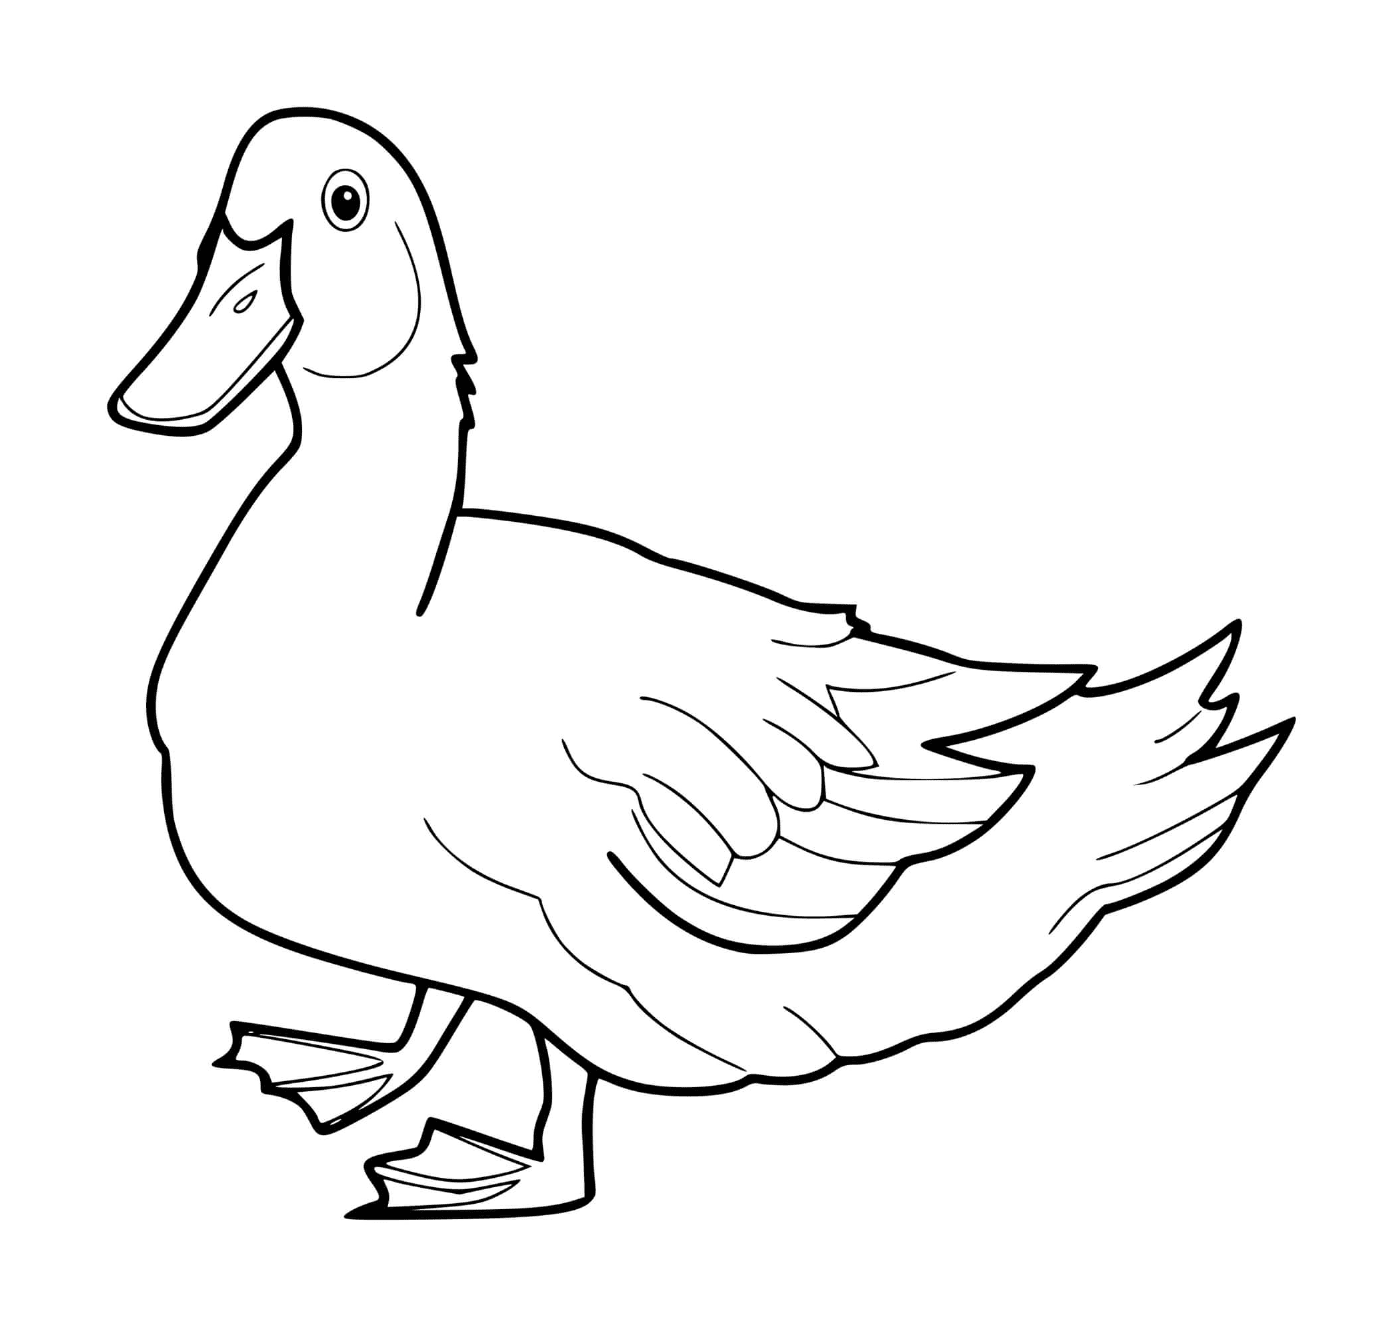  a realistic duck 